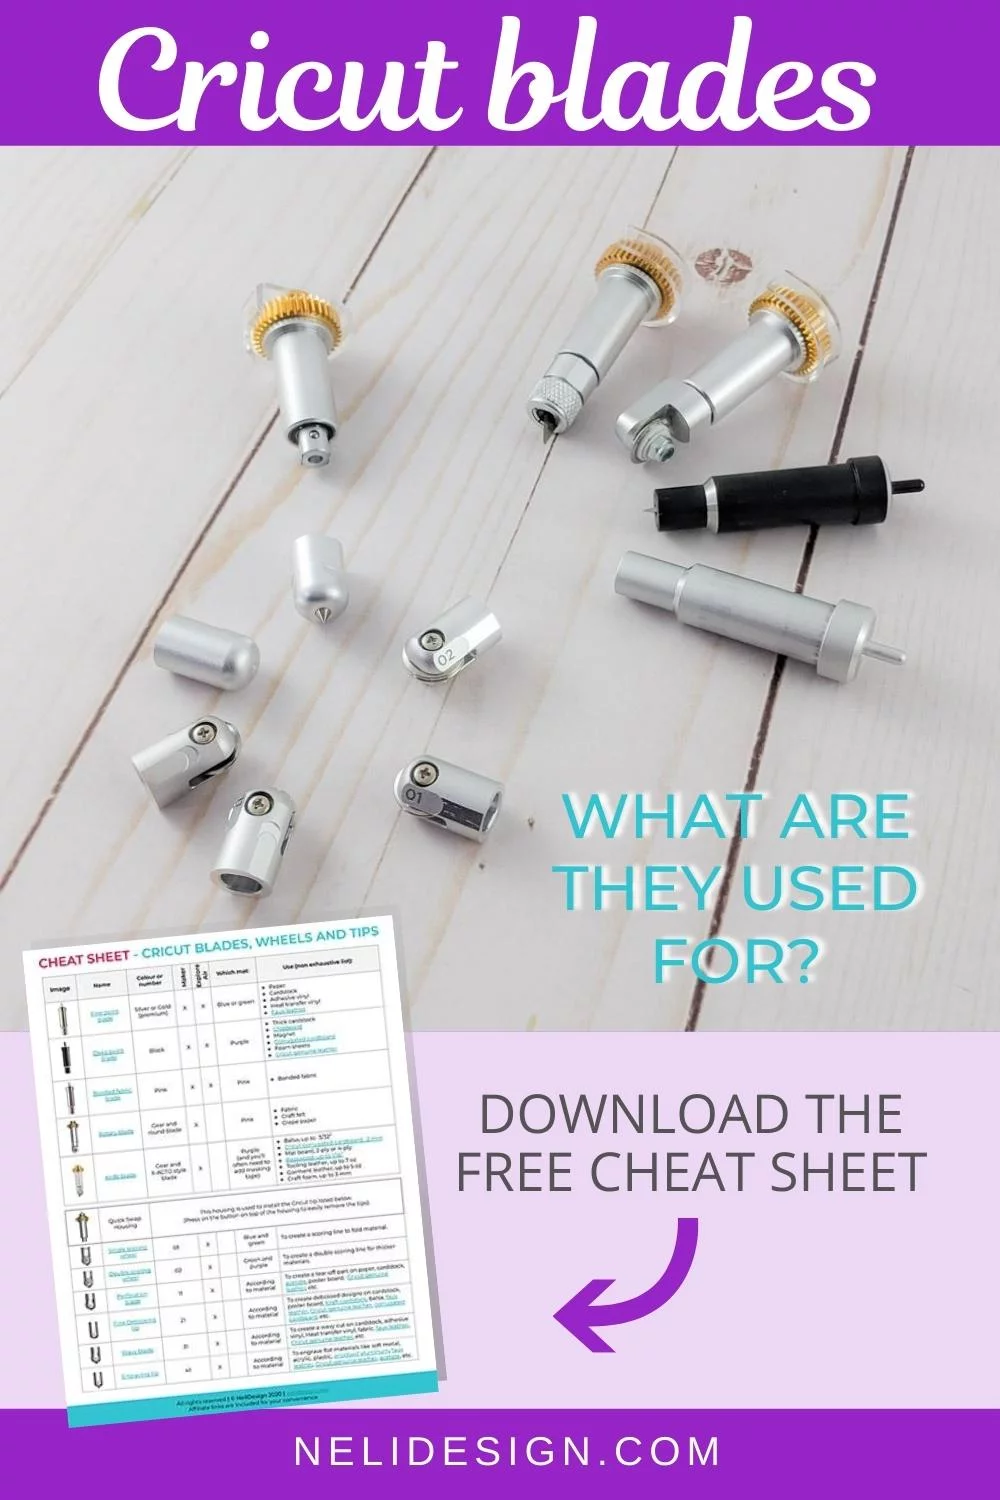 Pinterest image written Cricut blades, what are they used for? Download the free cheat sheet.